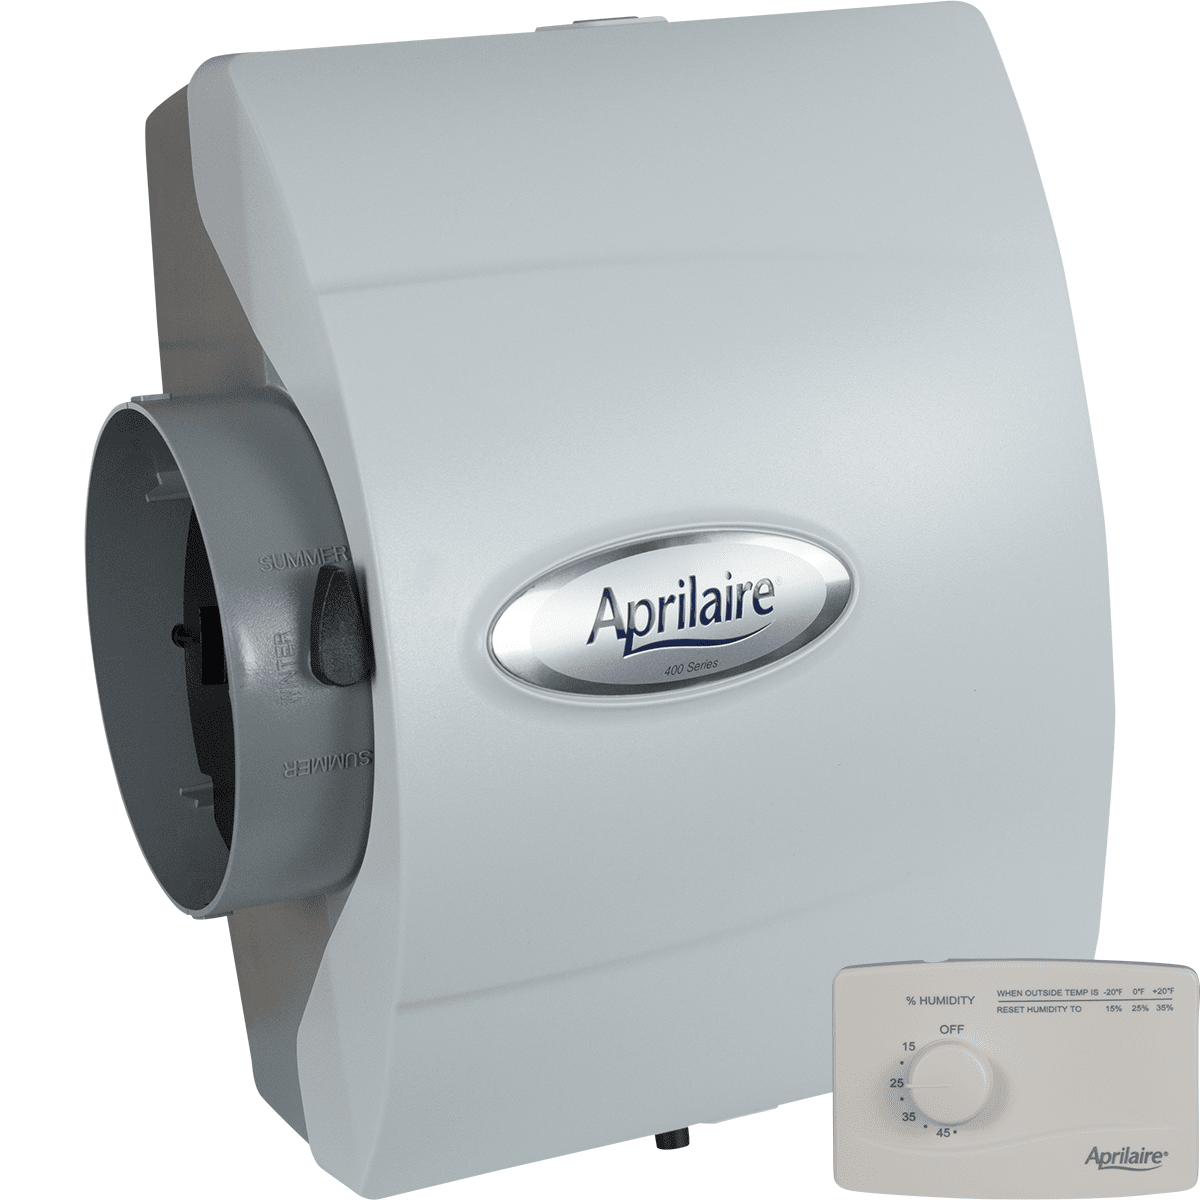 Aprilaire 400 Bypass Humidifier - Manual Control